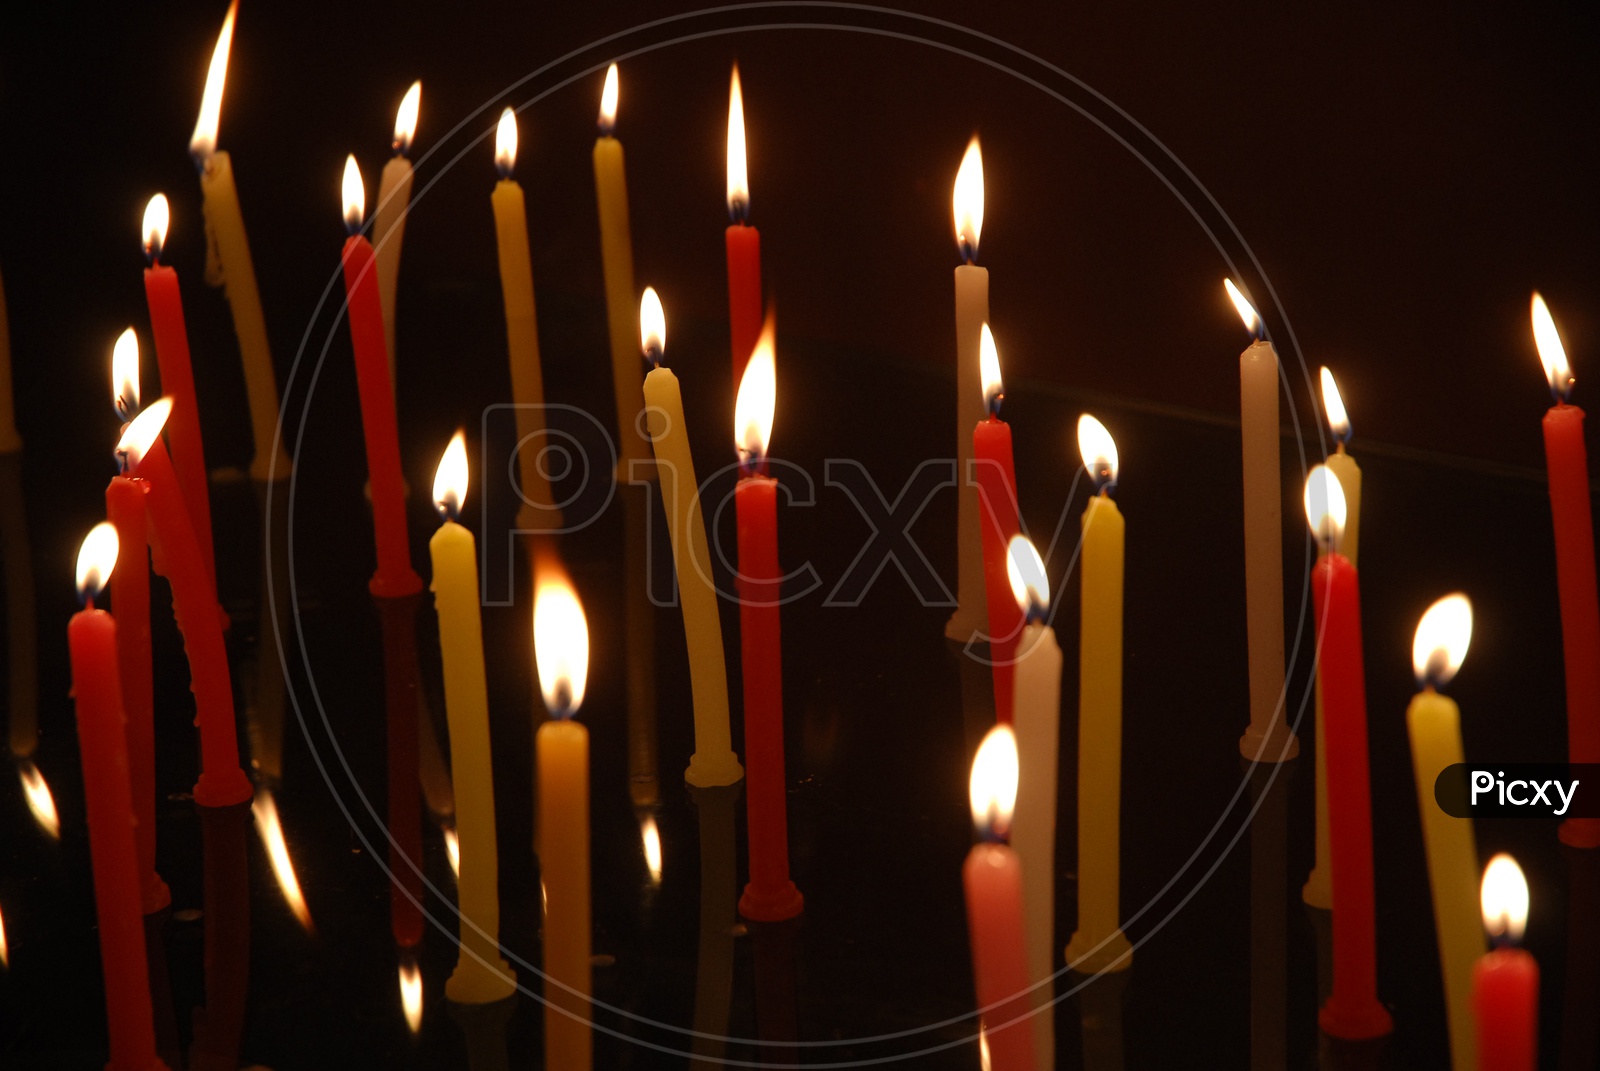 Colourful candles lit in a black background